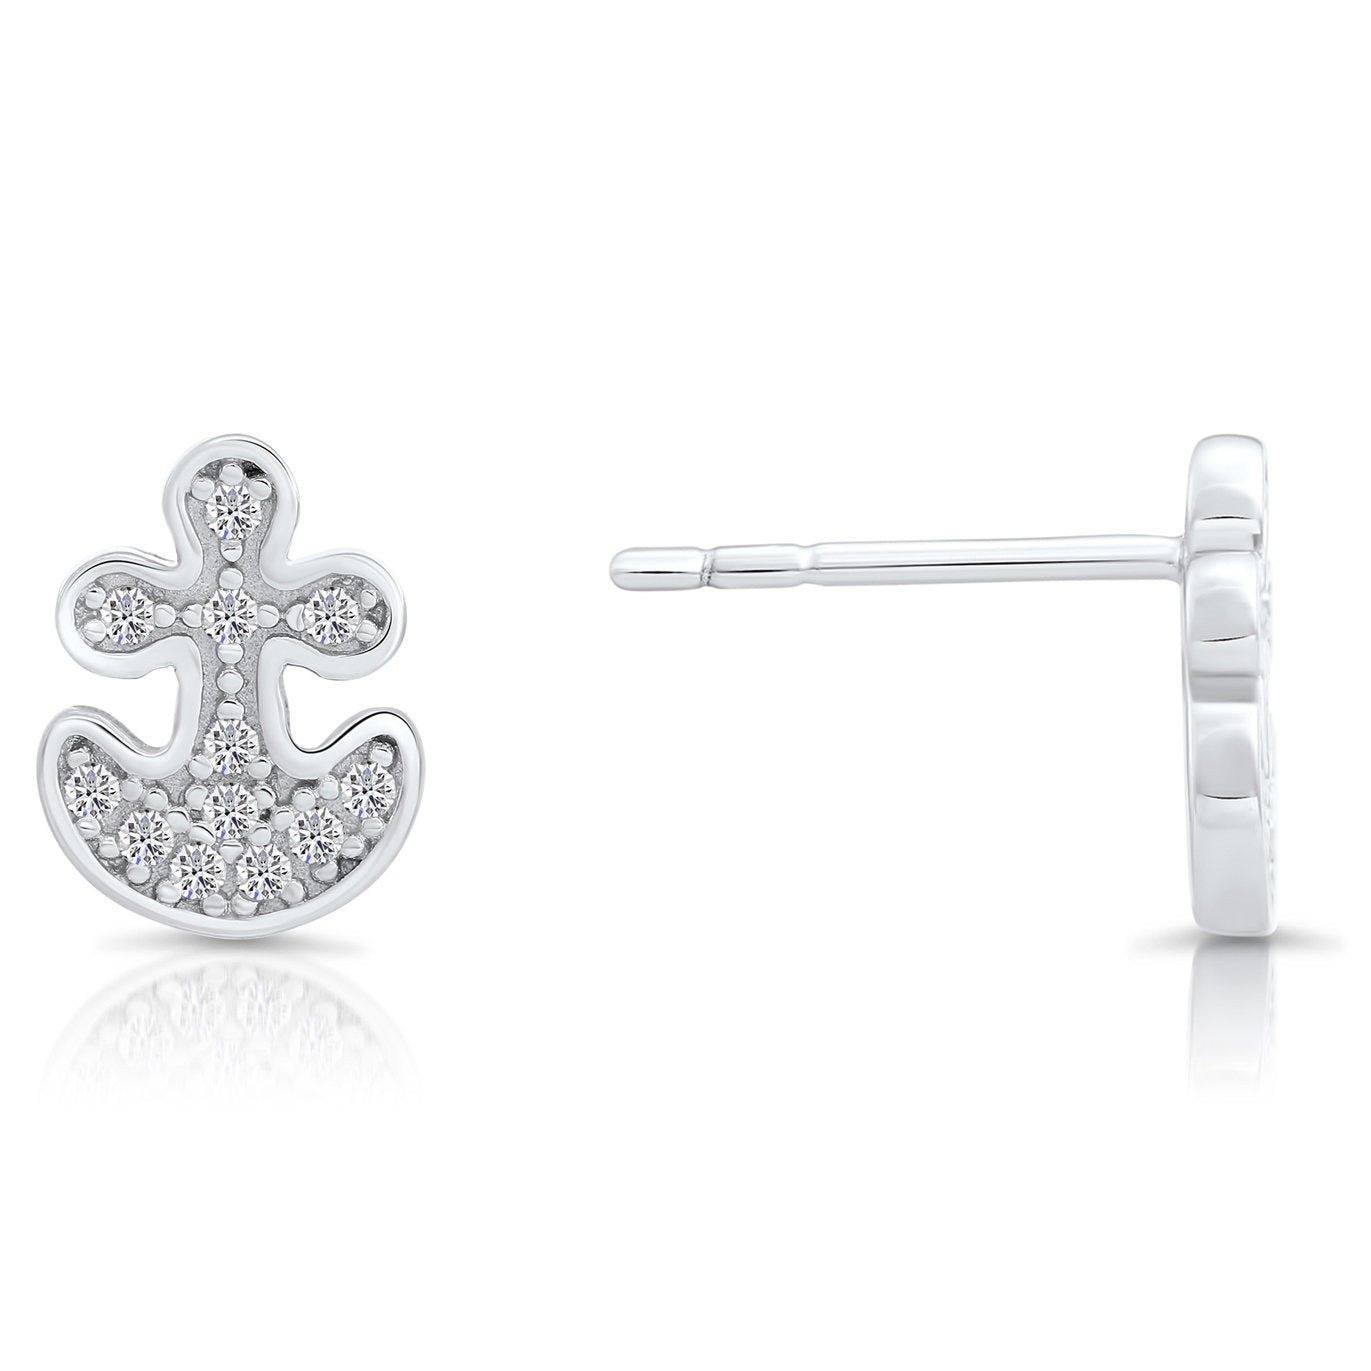 Sterling Silver Small Anchor Stud Earrings, 1659